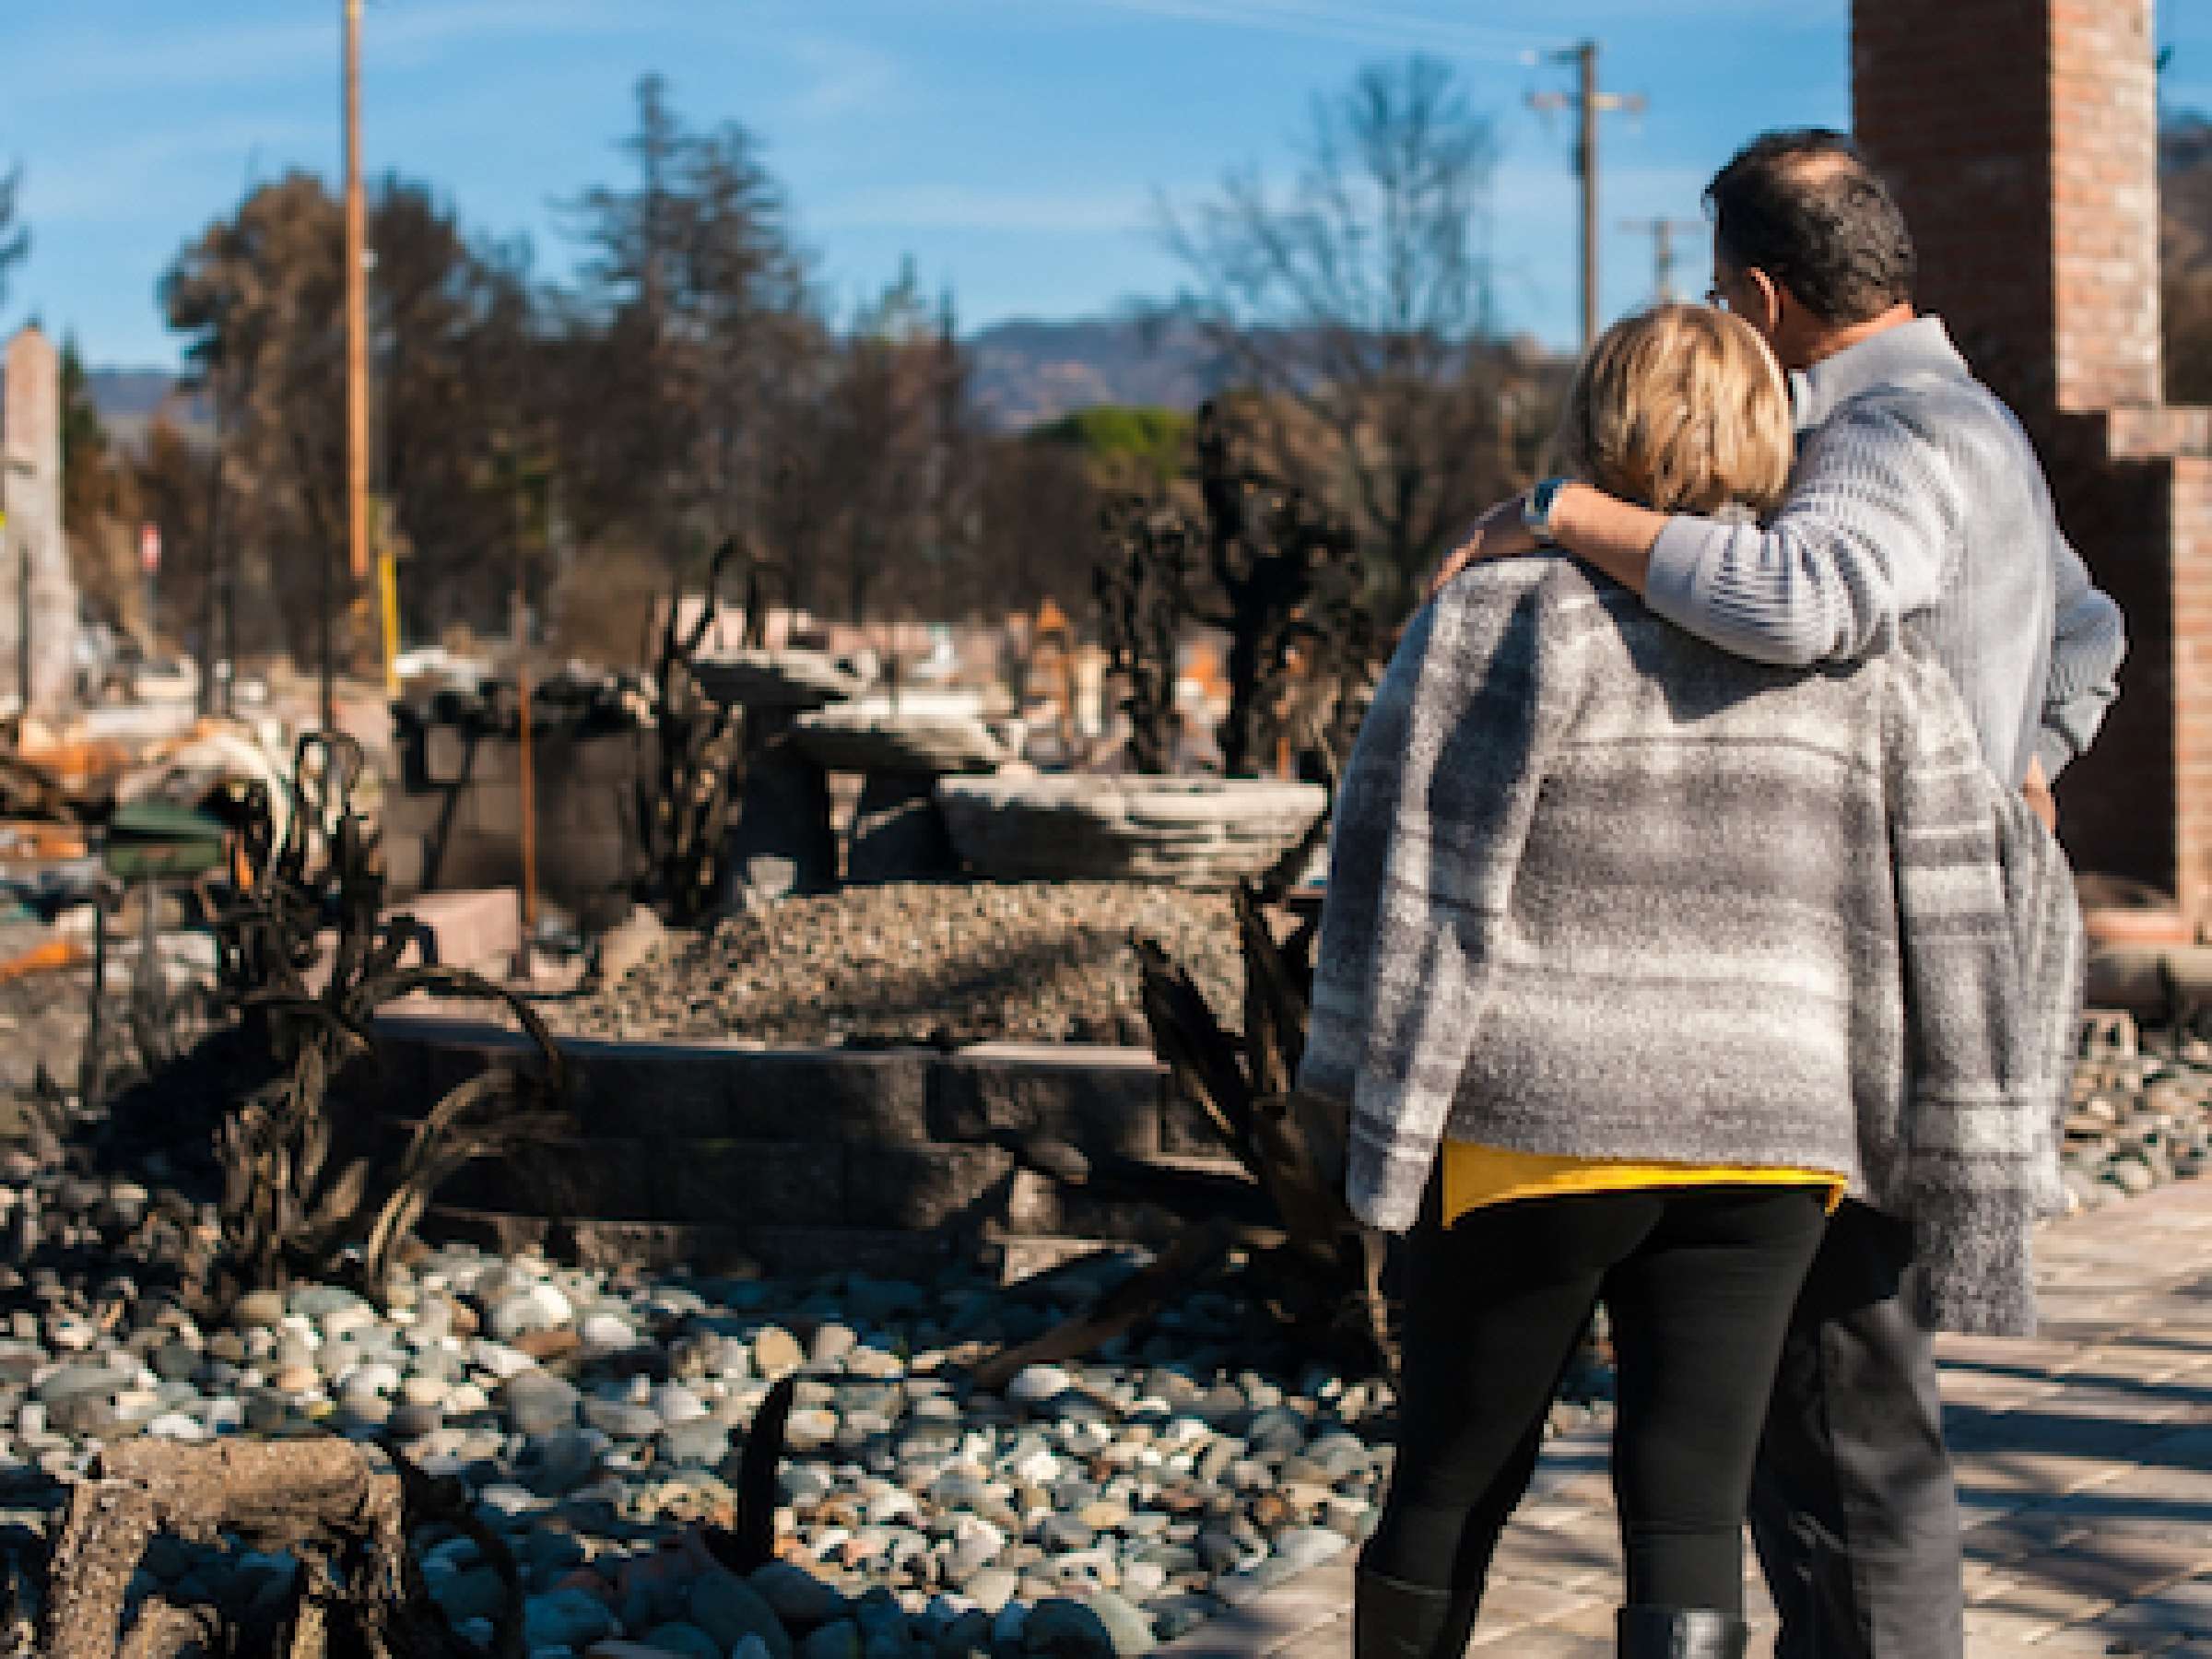 Man and his wife owners, checking burned and ruined of their house and yard after fire, consequences of fire disaster accident. Ruins after fire disaster.